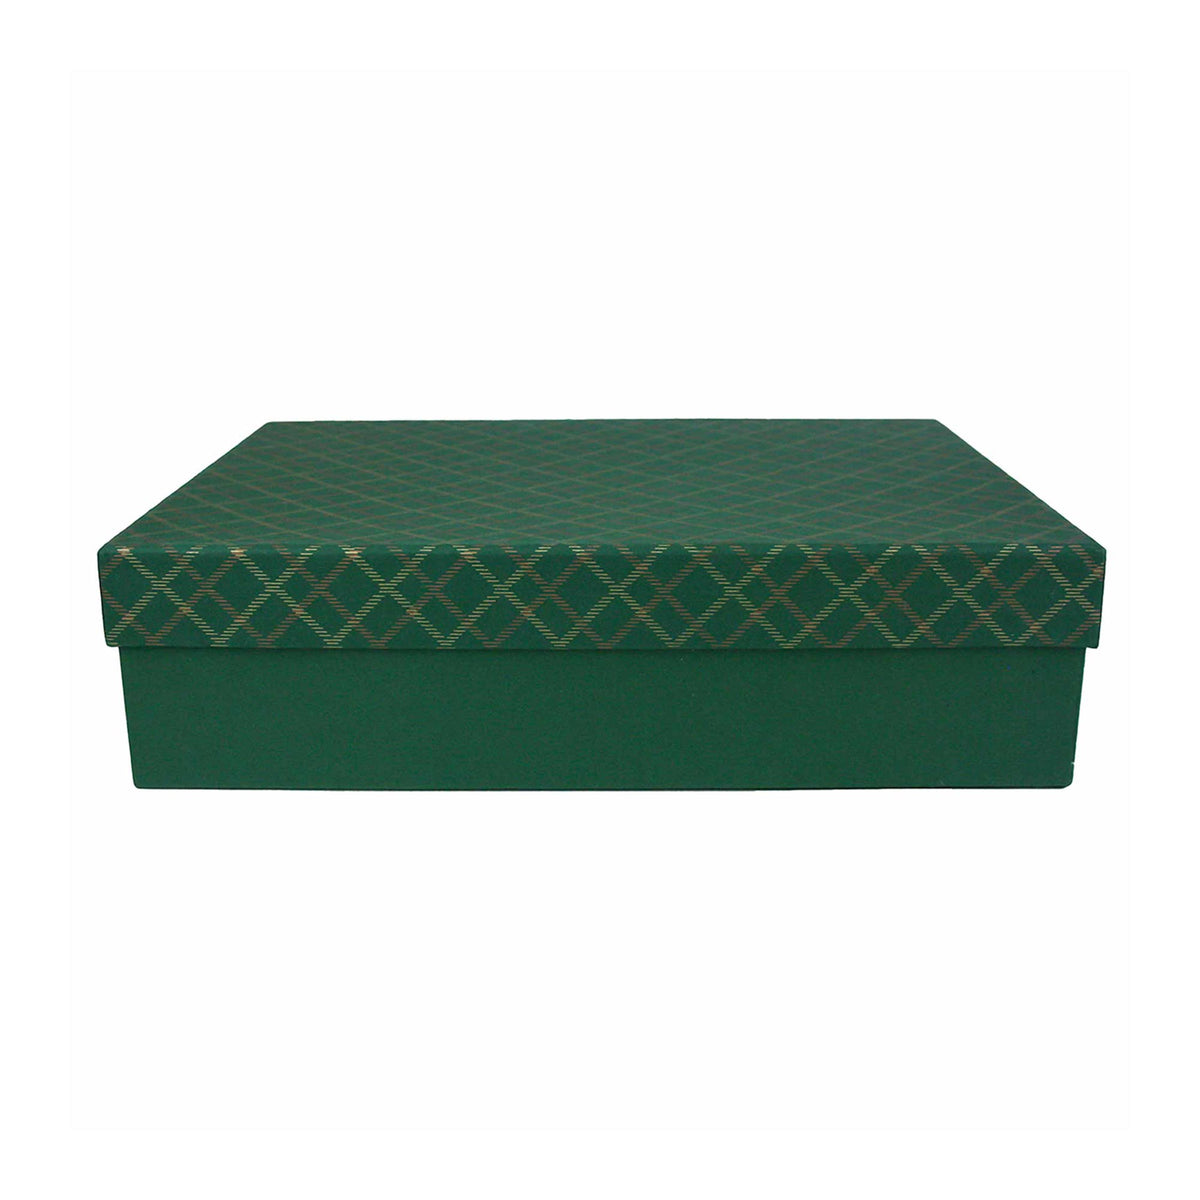 Single Handmade Green Chequered Gift Boxes